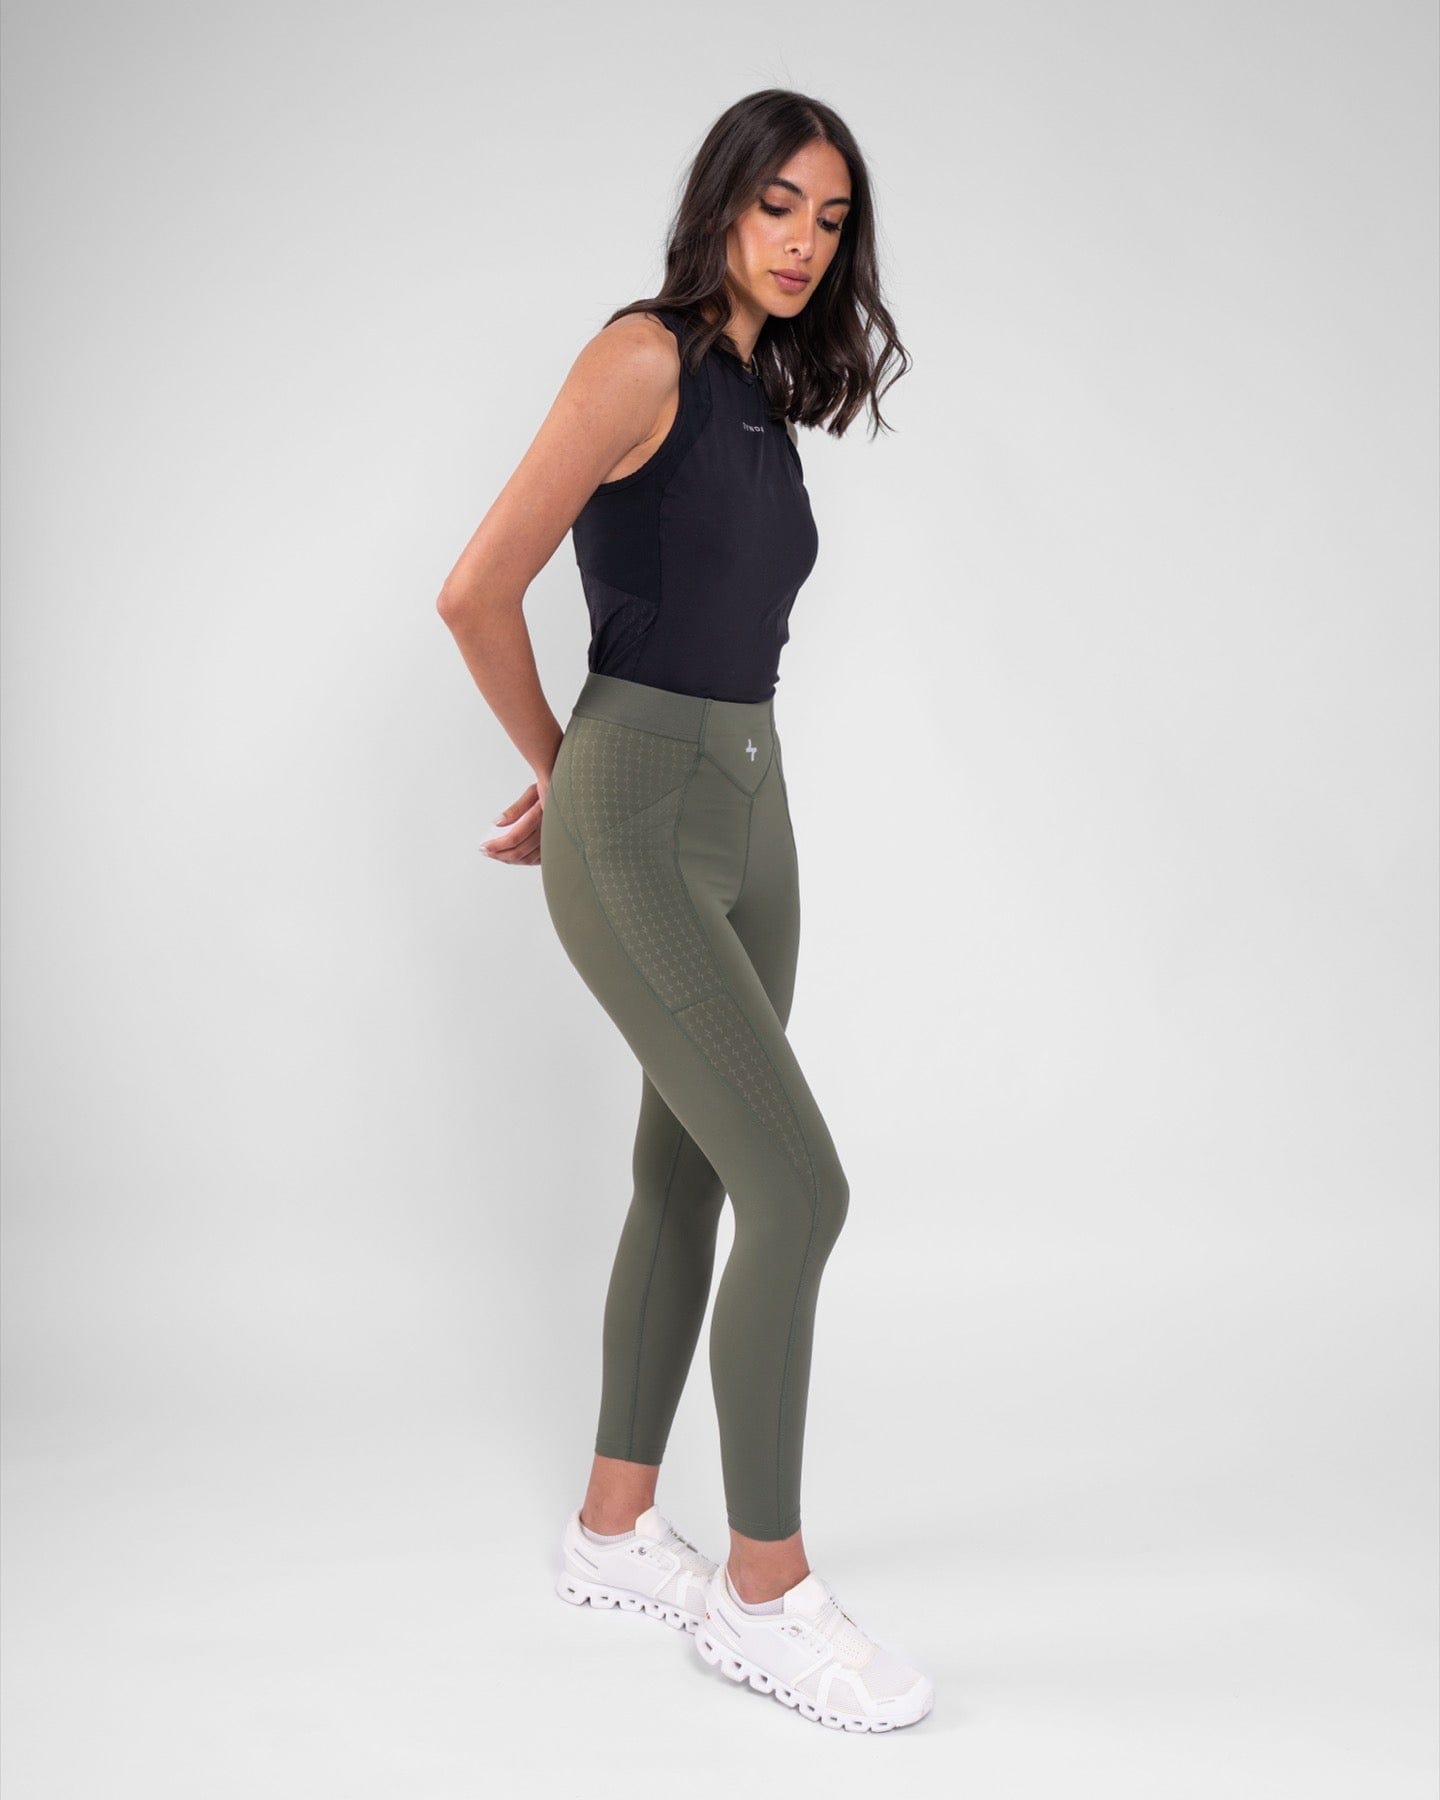 A woman seen posing, wearing a black tank top and olive THABYA LEGGINGS leggings by qynda, standing against a light grey background.